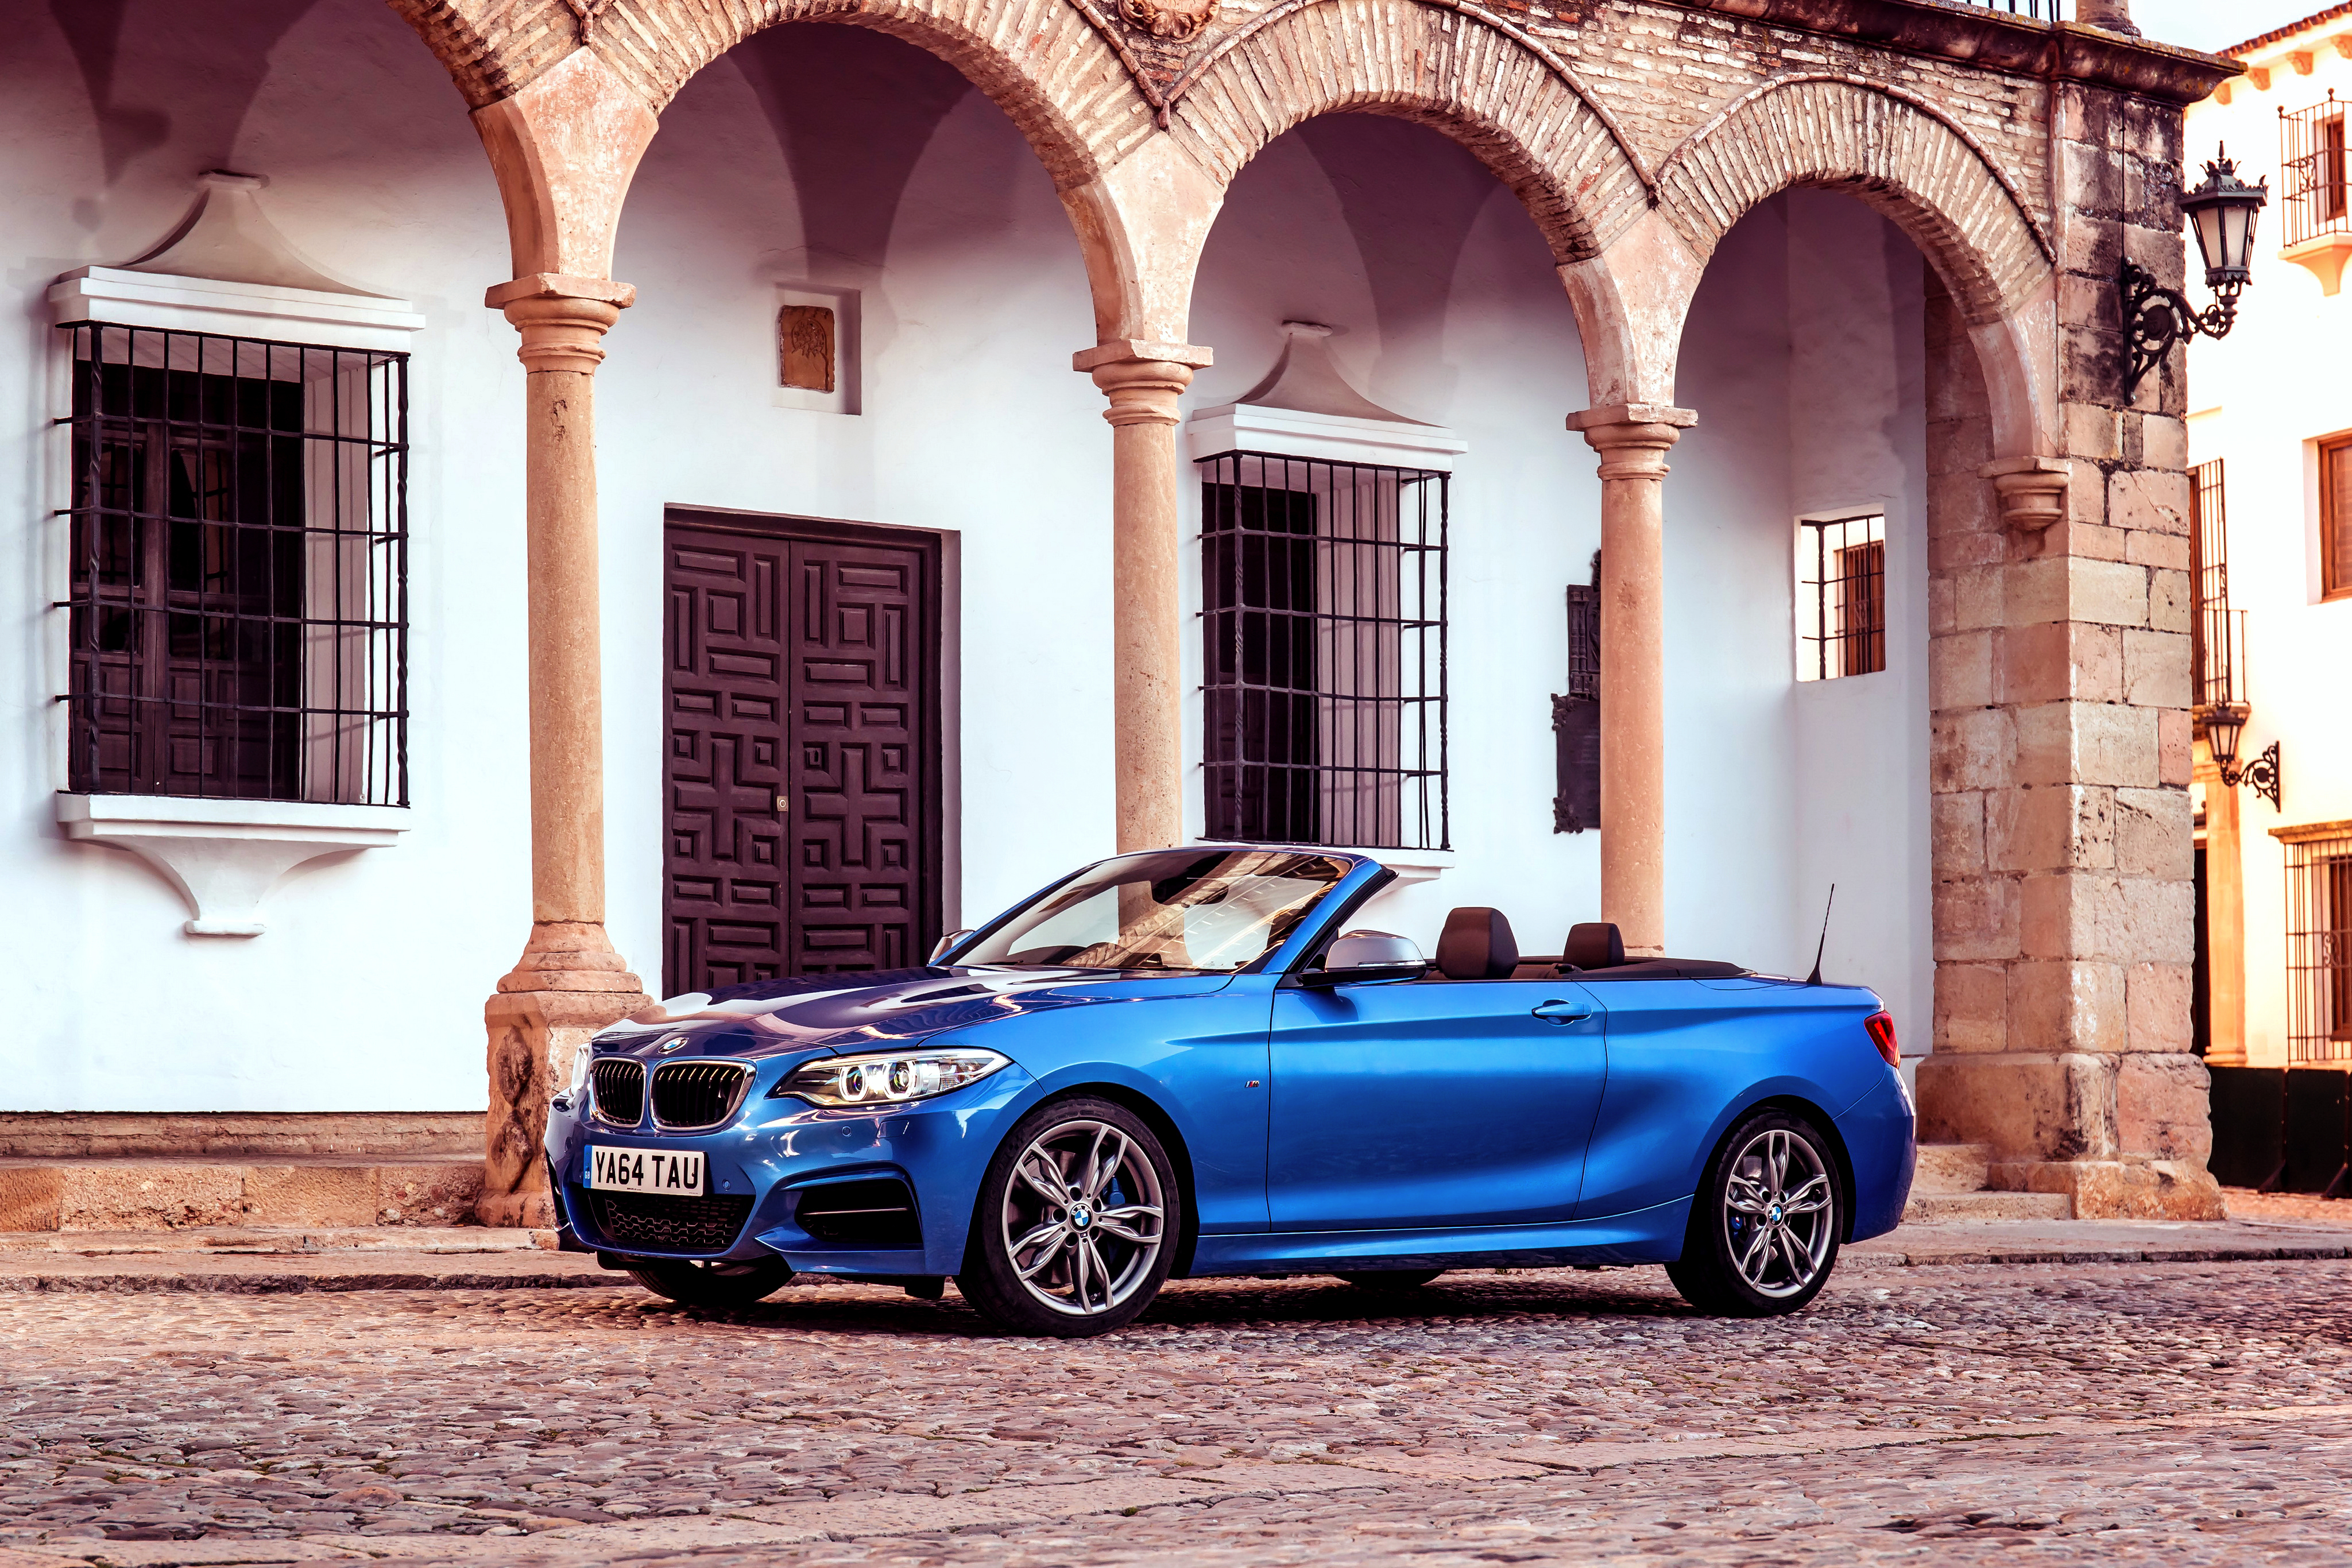 113205 Screensavers and Wallpapers Cabriolet for phone. Download bmw, cars, blue, side view, cabriolet, uk-spec, m235i, f23 pictures for free